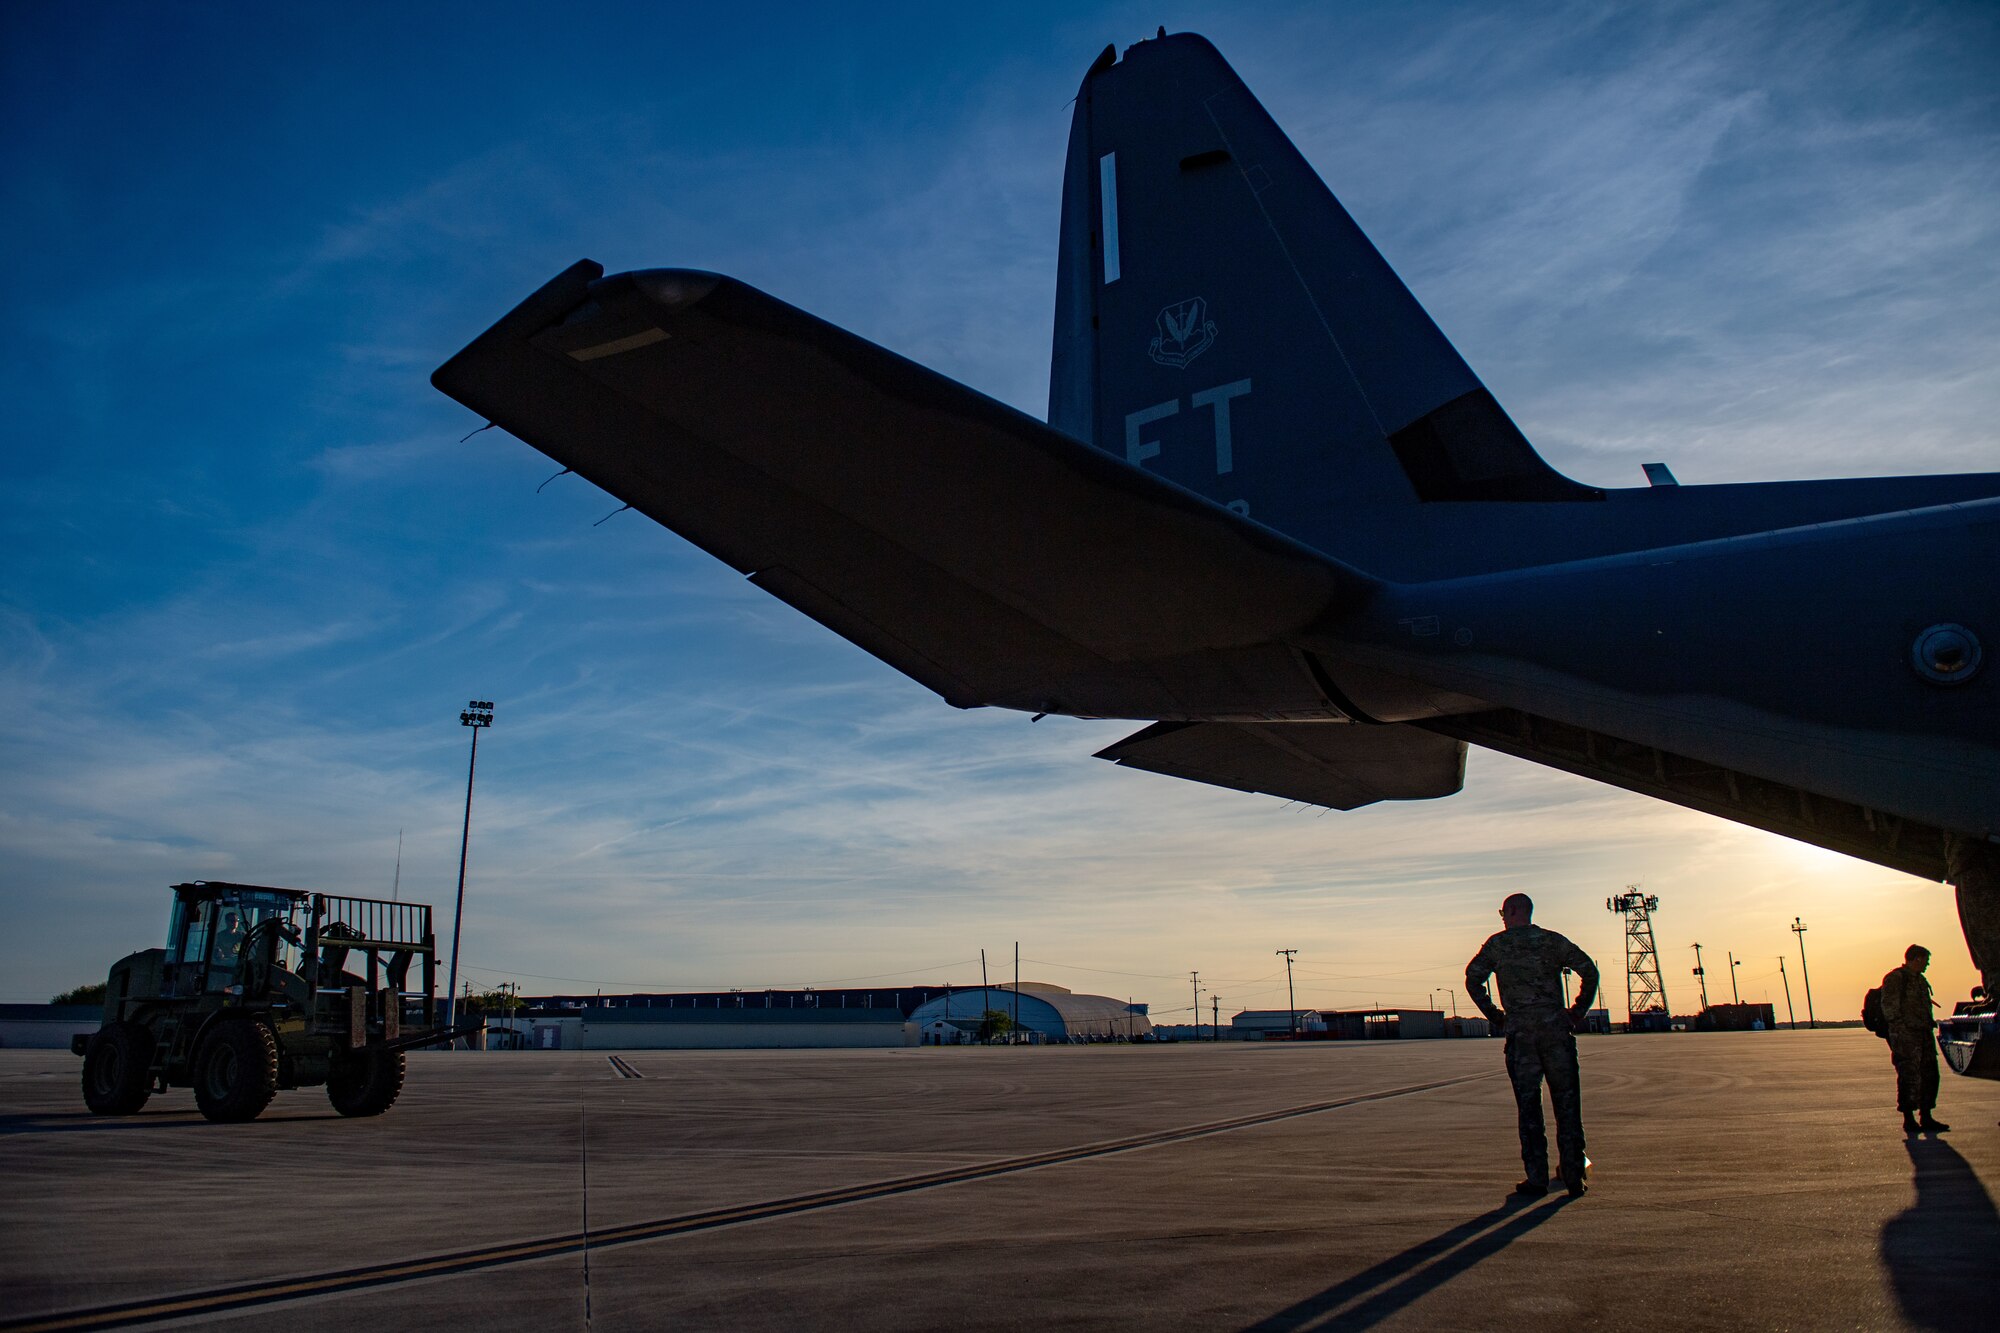 A U.S. Air Force Airman waits for a forklift to unload cargo from an HC-130J Combat King II assigned to the 71st Rescue Squadron during Exercise Ready Tiger 24-1 at Savannah Air National Guard Base, Georgia, April 8, 2024. The aircraft flew from Moody Air Force Base, Georgia to Savannah to set up a main operating base. Ready Tiger 24-1 is a readiness exercise demonstrating the 23rd Wing’s ability to plan, prepare and execute operations and maintenance to project air power in contested and dispersed locations, defending the United States’ interests and allies. (U.S. Air Force photo by Senior Airman Courtney Sebastianelli)